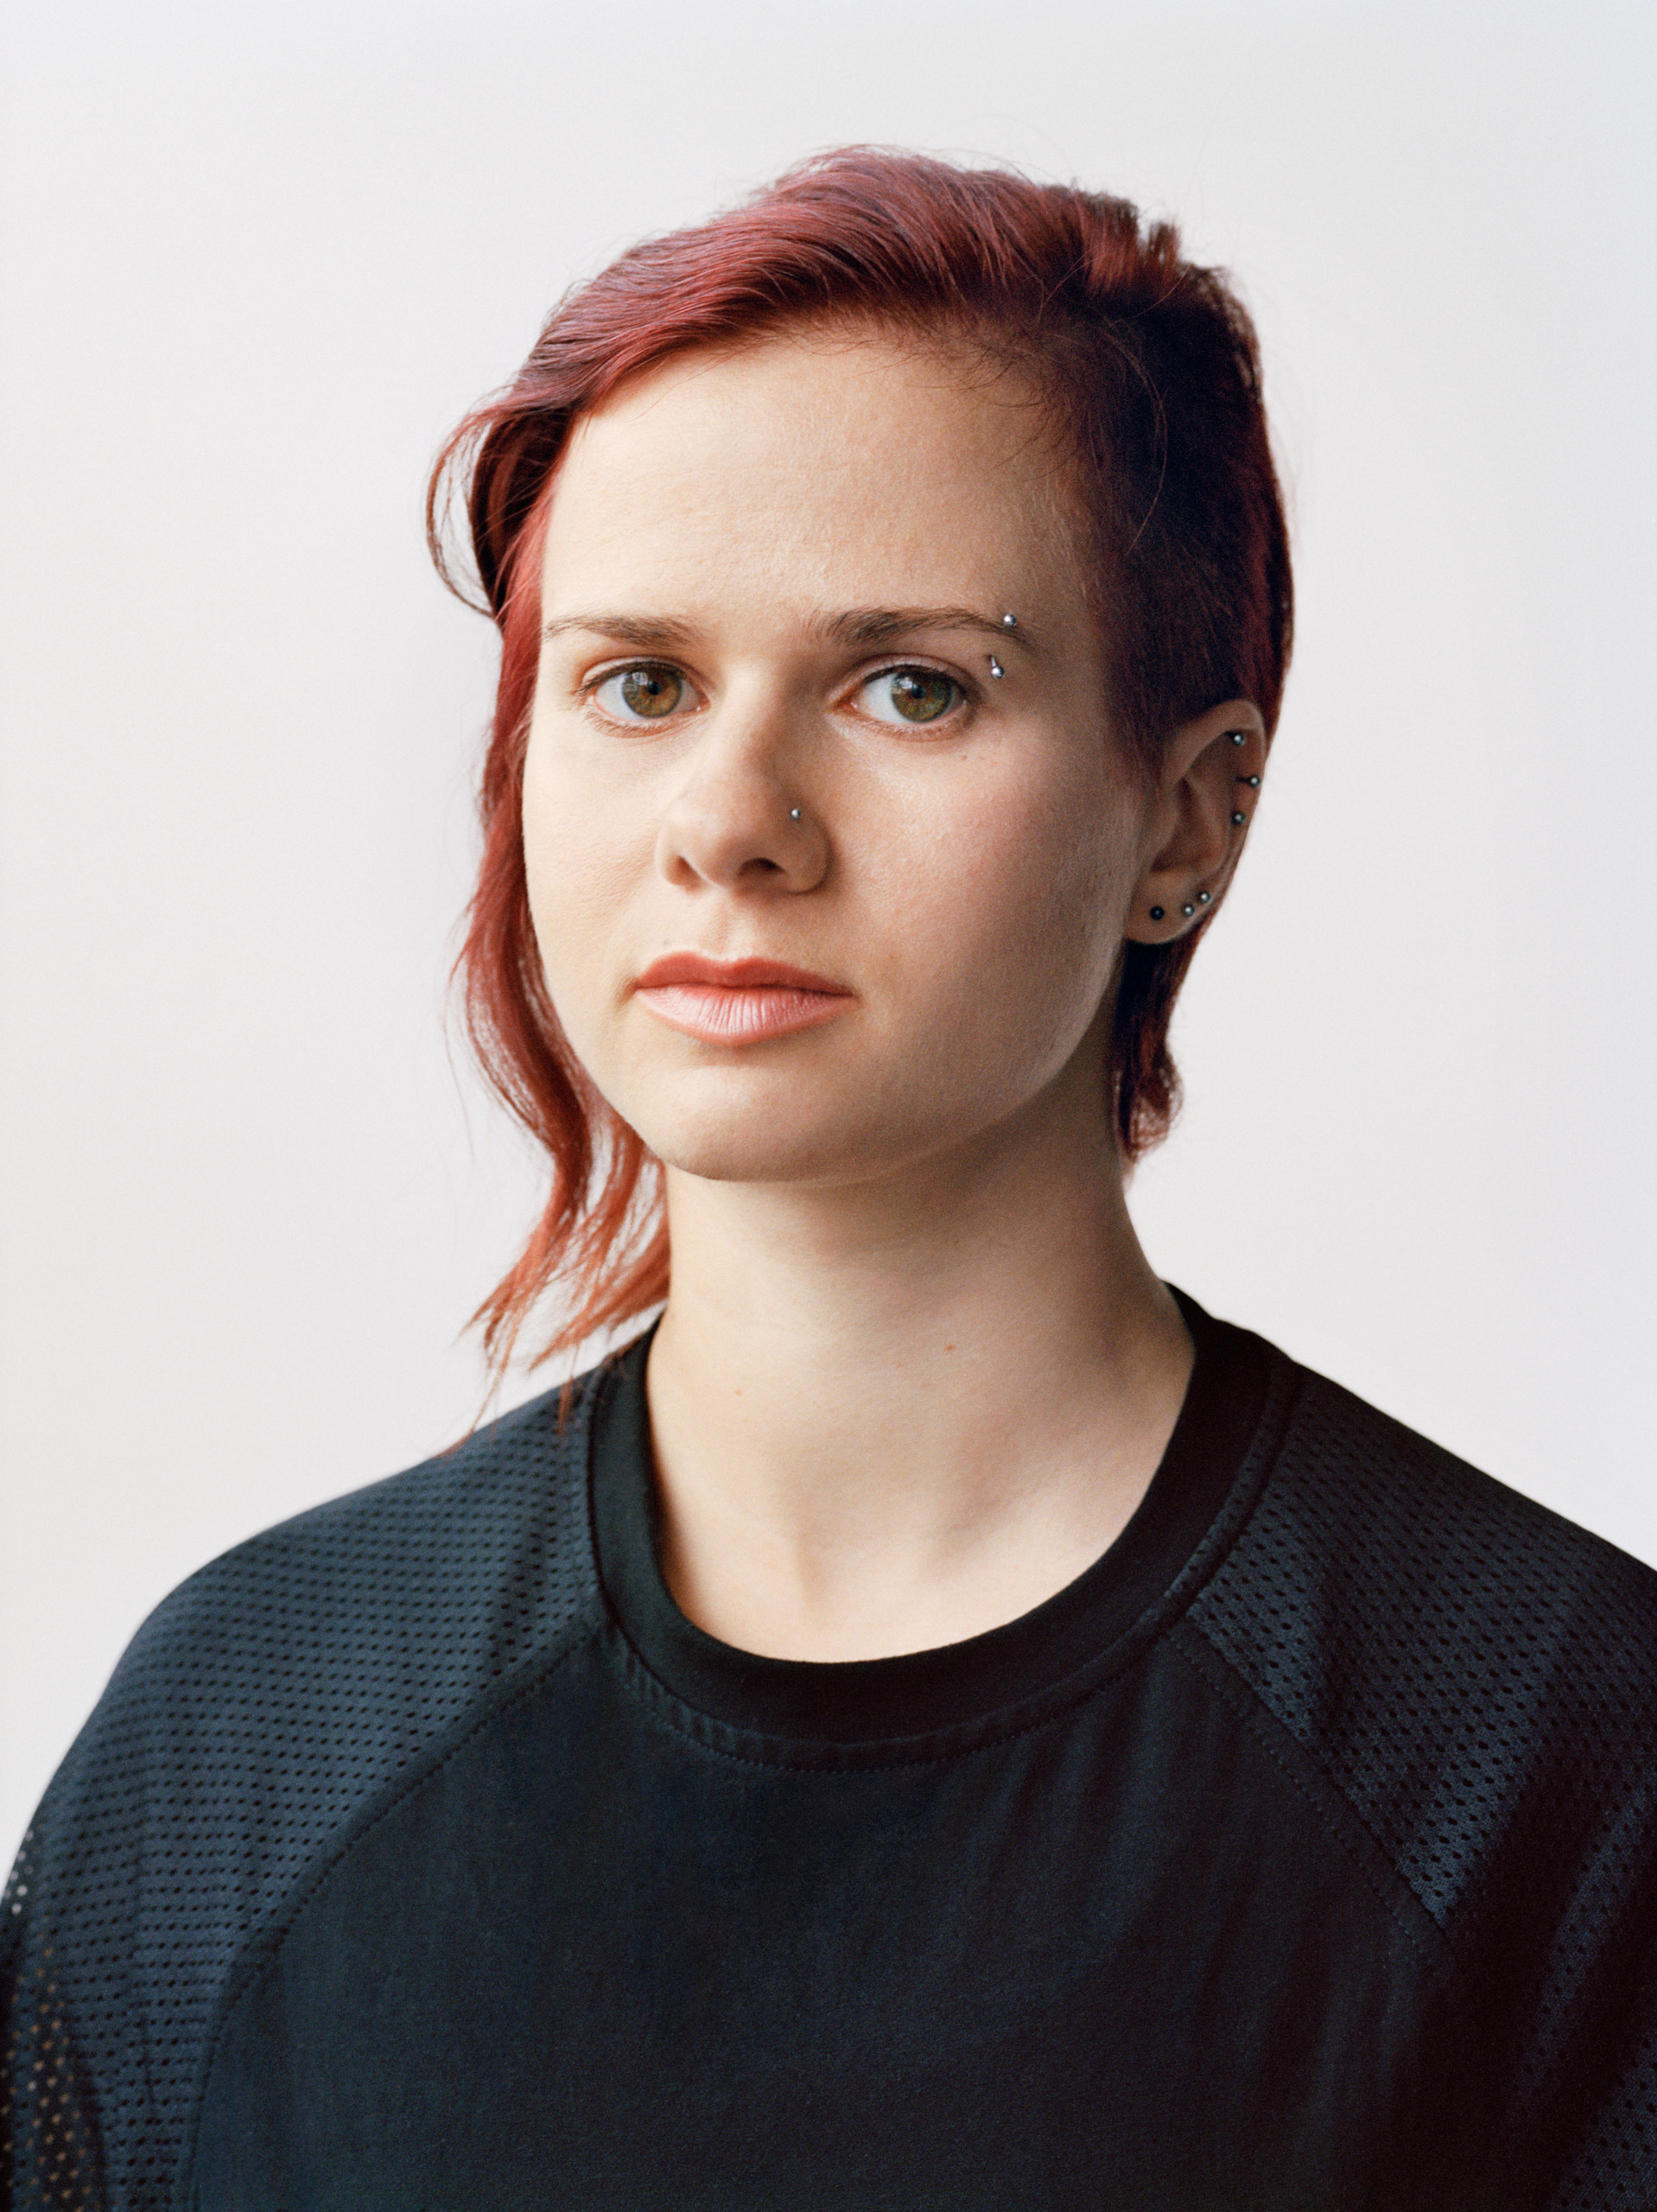 Marie McGwier identifies as queer and gender nonconforming (Jody Rogac for TIME)